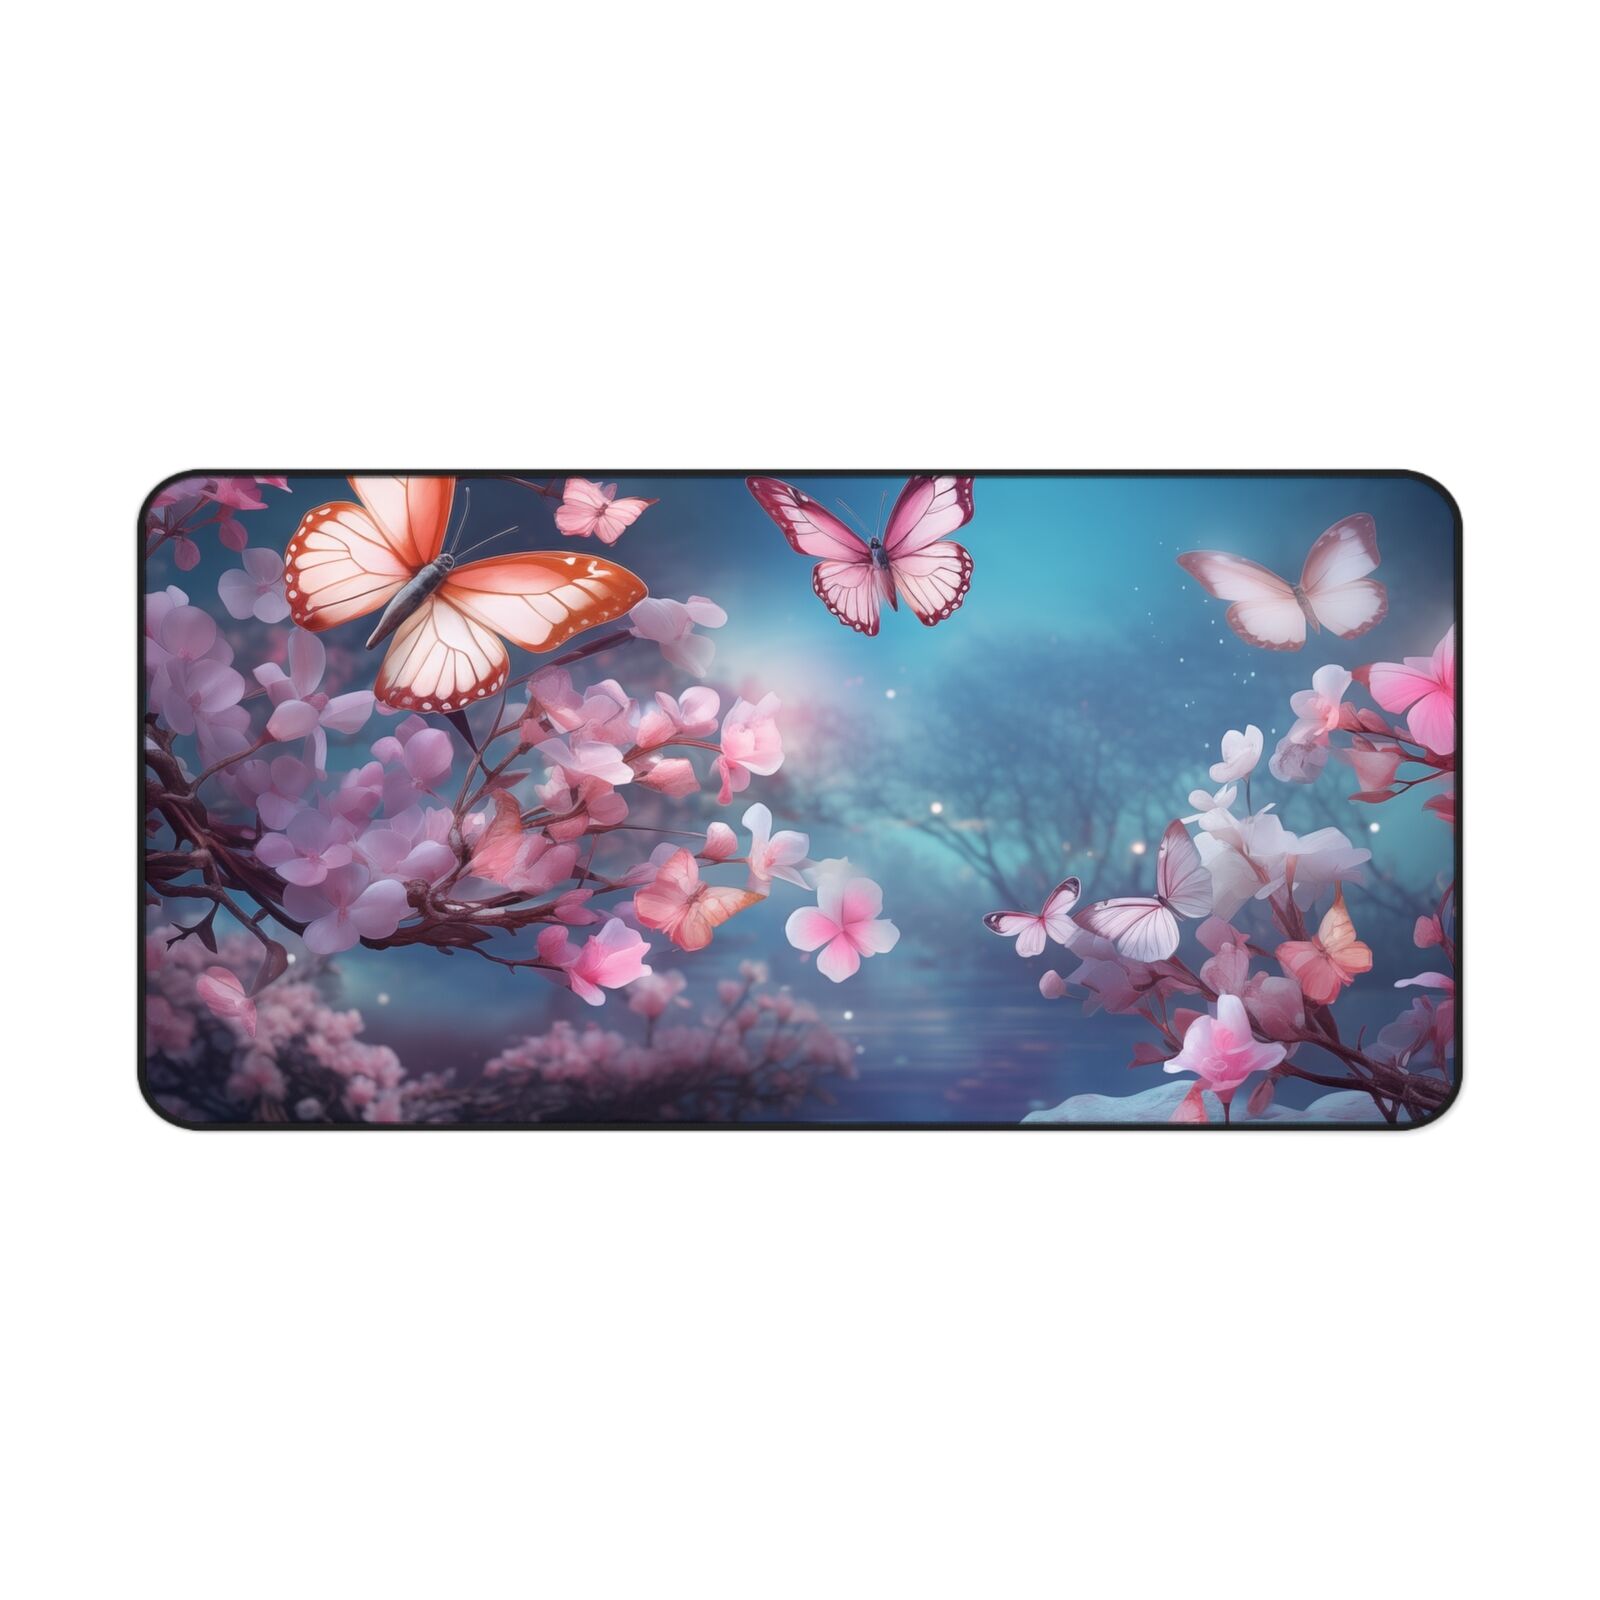 Butterfly Mouse pad - Aesthetic, Cute, Realistic Image, Pink Mousepad.